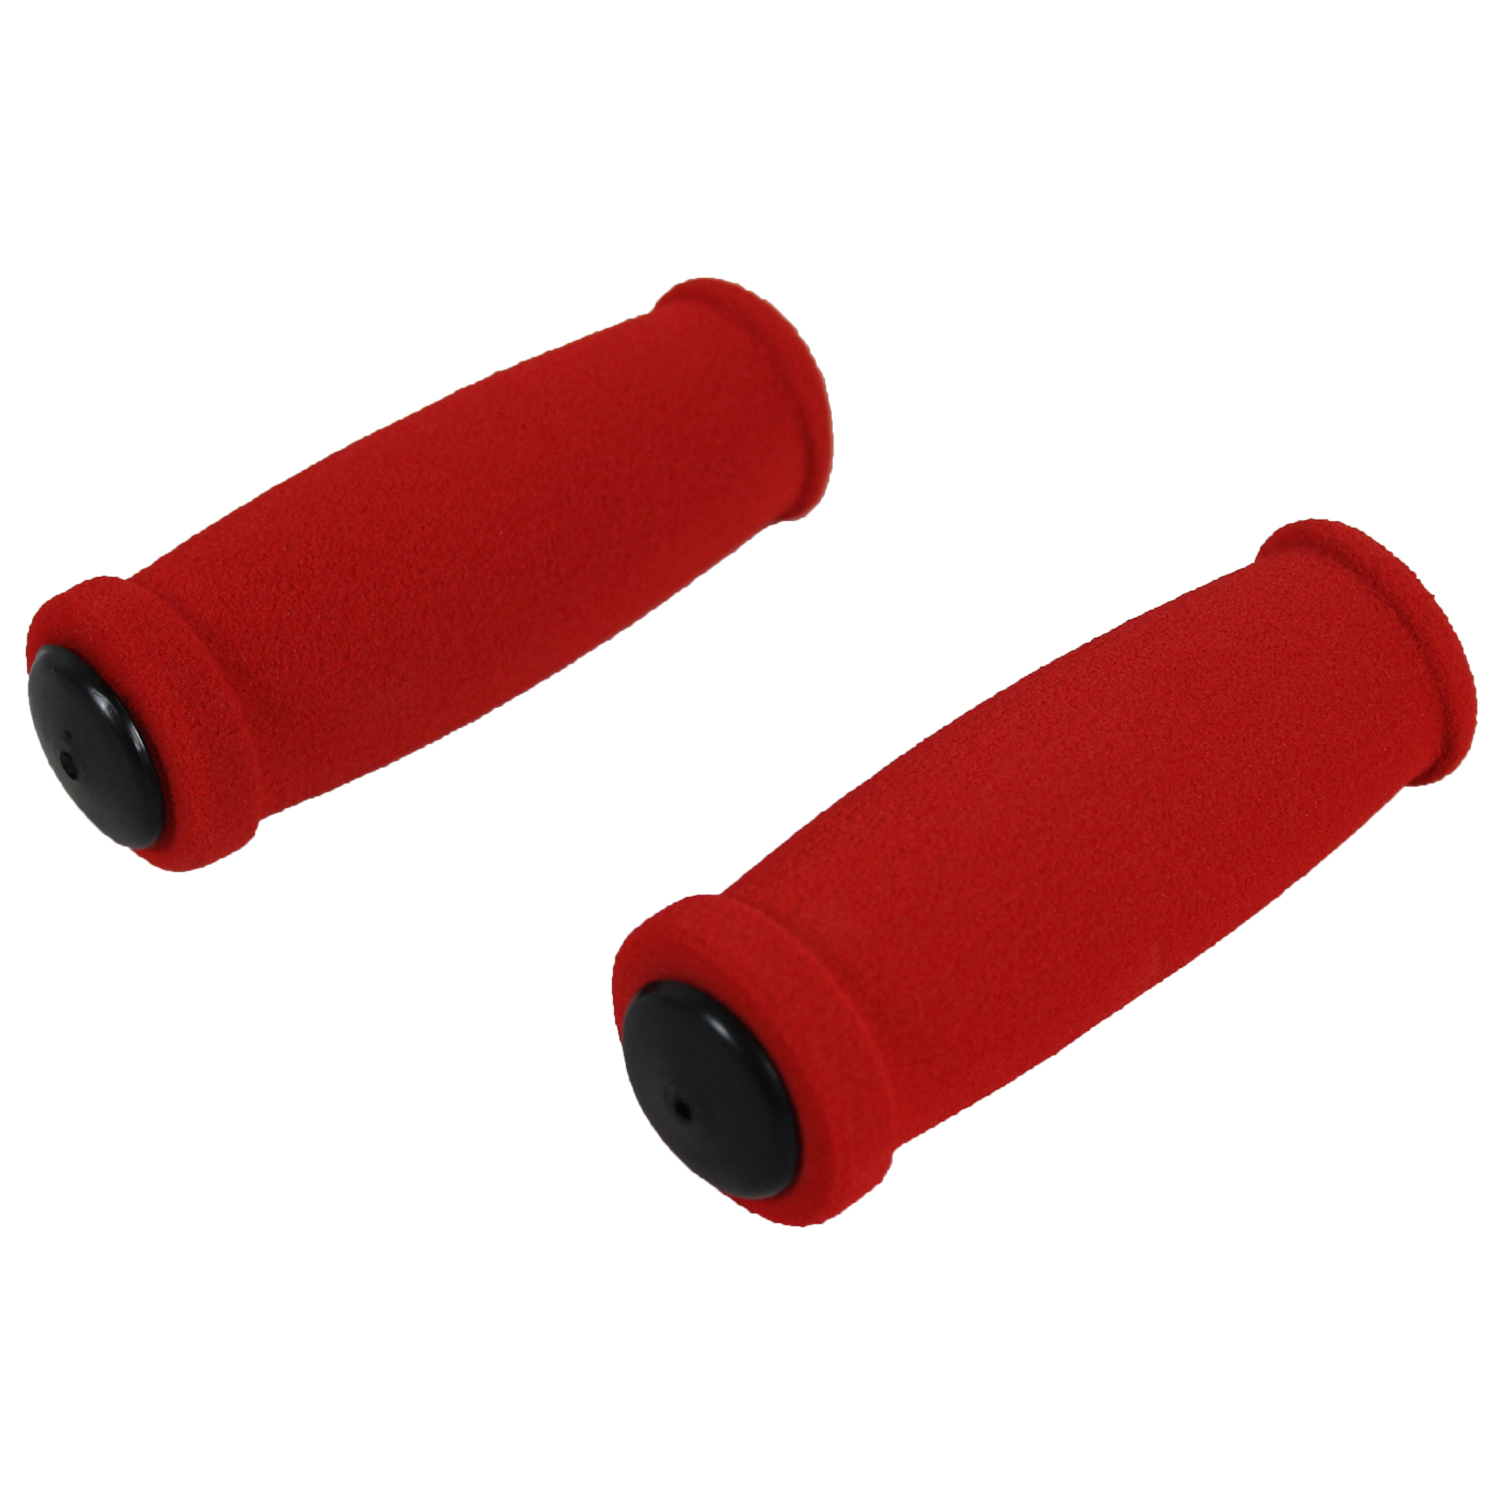 Foam Grip for Handlebar Kick Push New Replacement Handle Grips for Razor Scooter